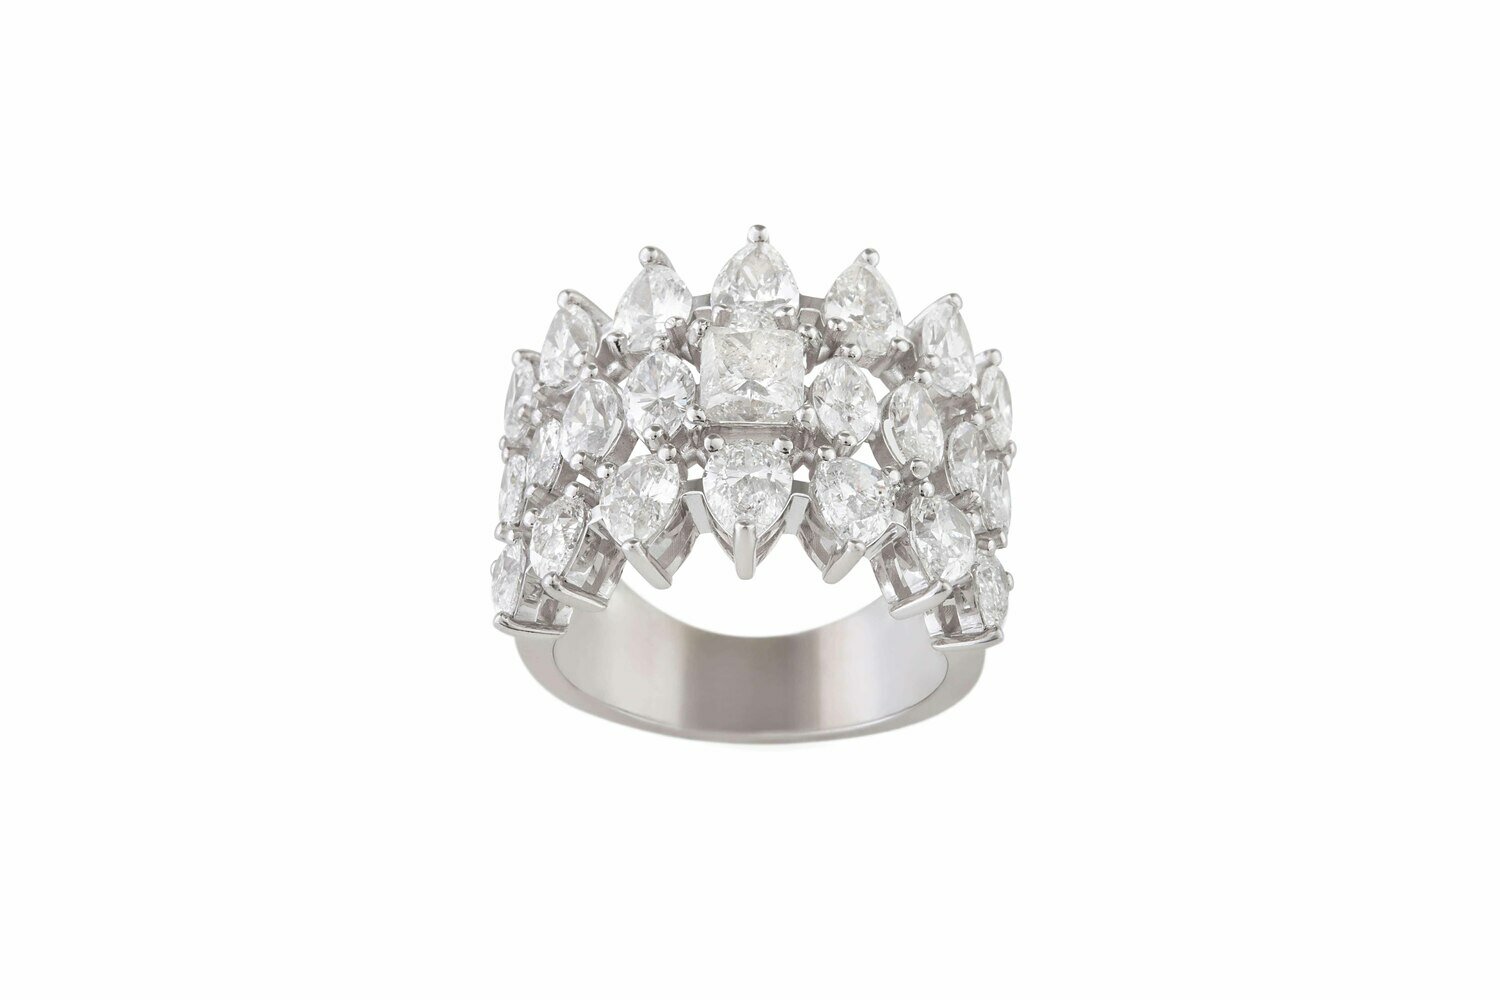 Wedding Band Diamond Ring with Marquise, Pear and Princess